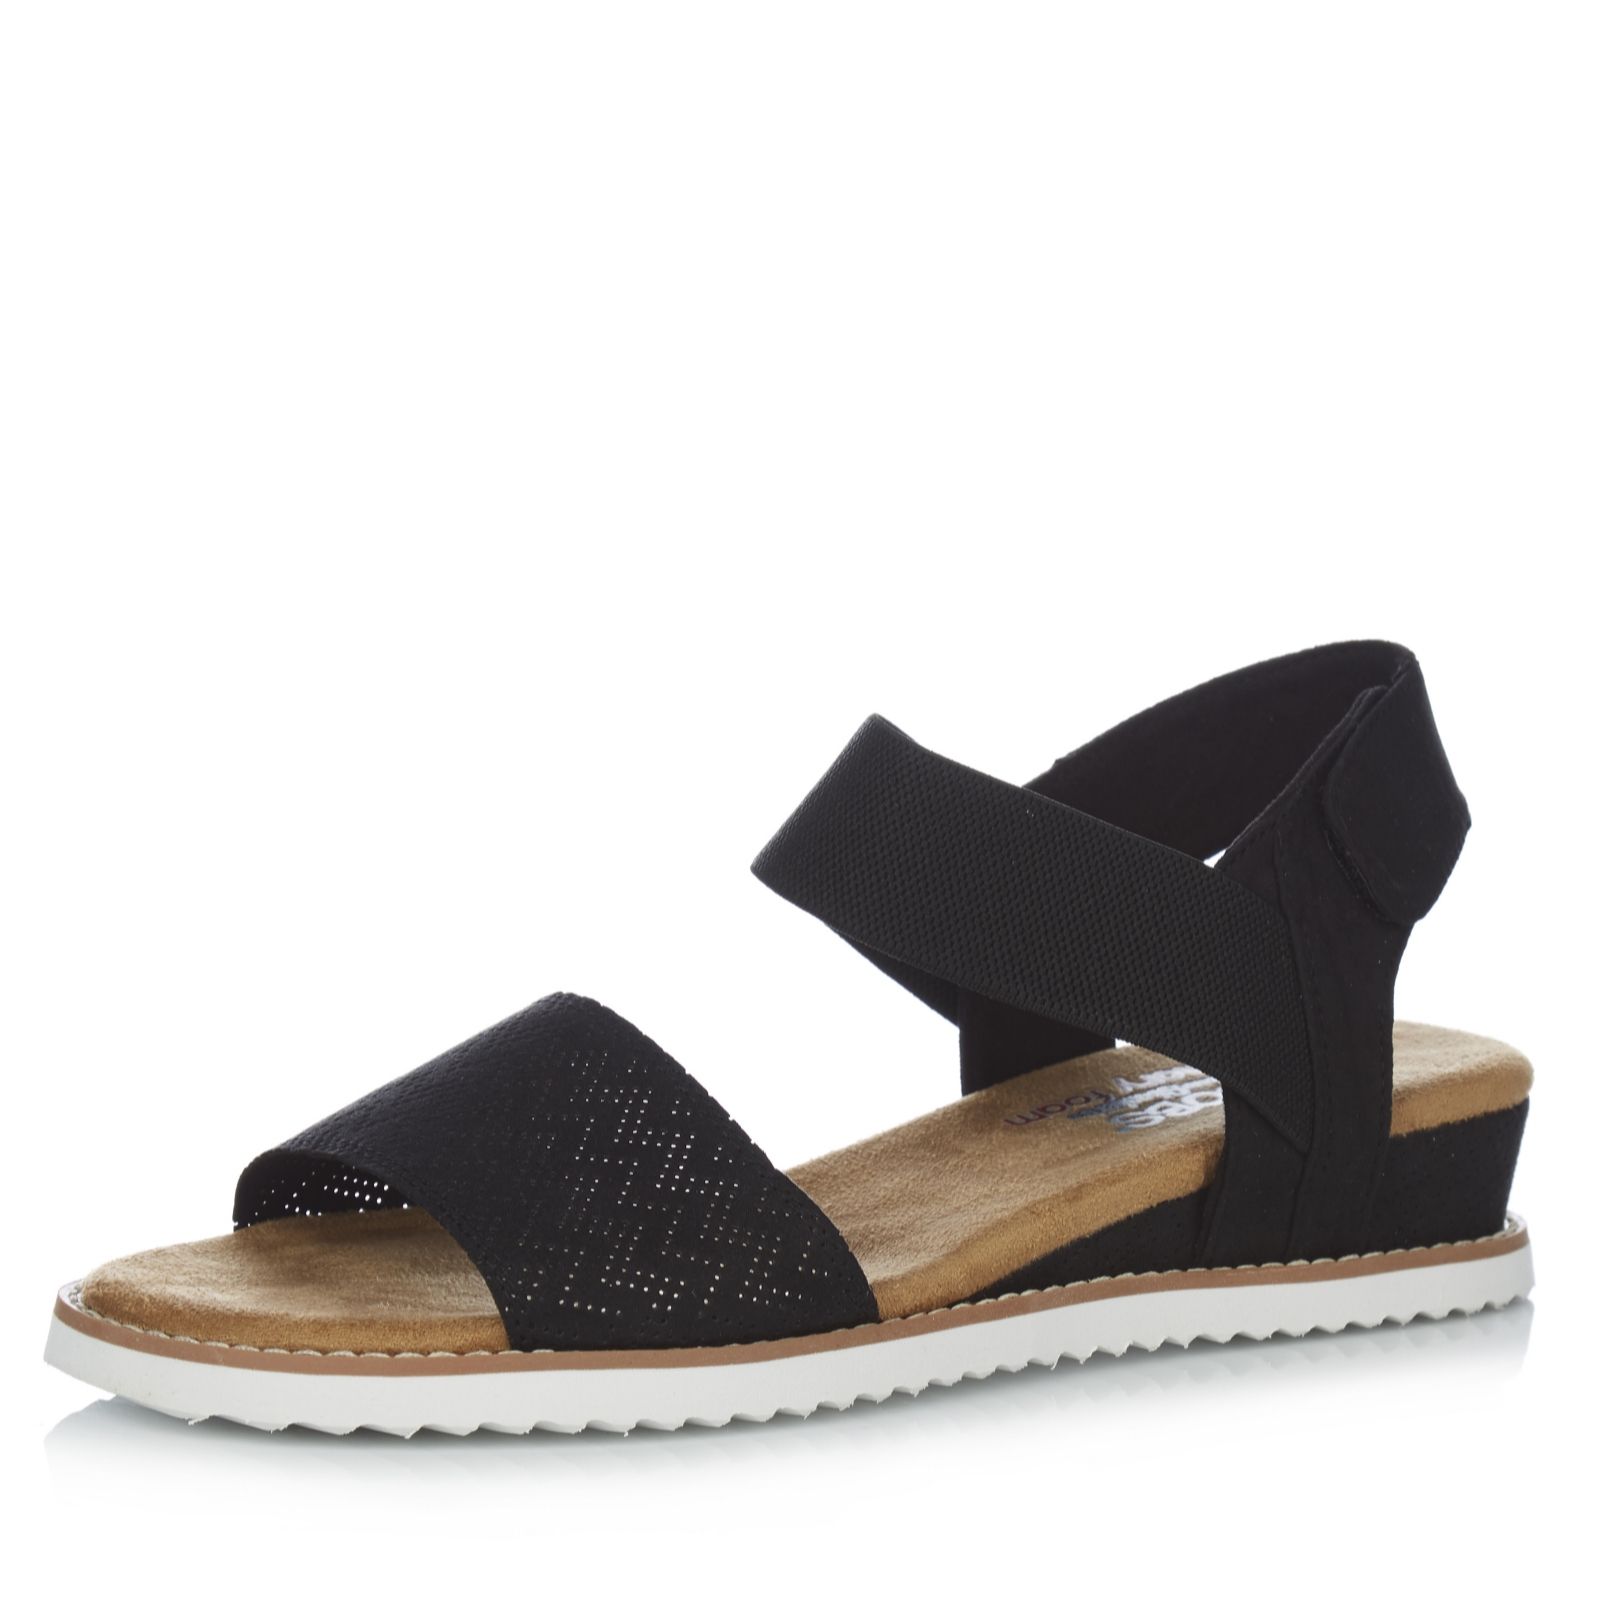 bobs sandals by skechers